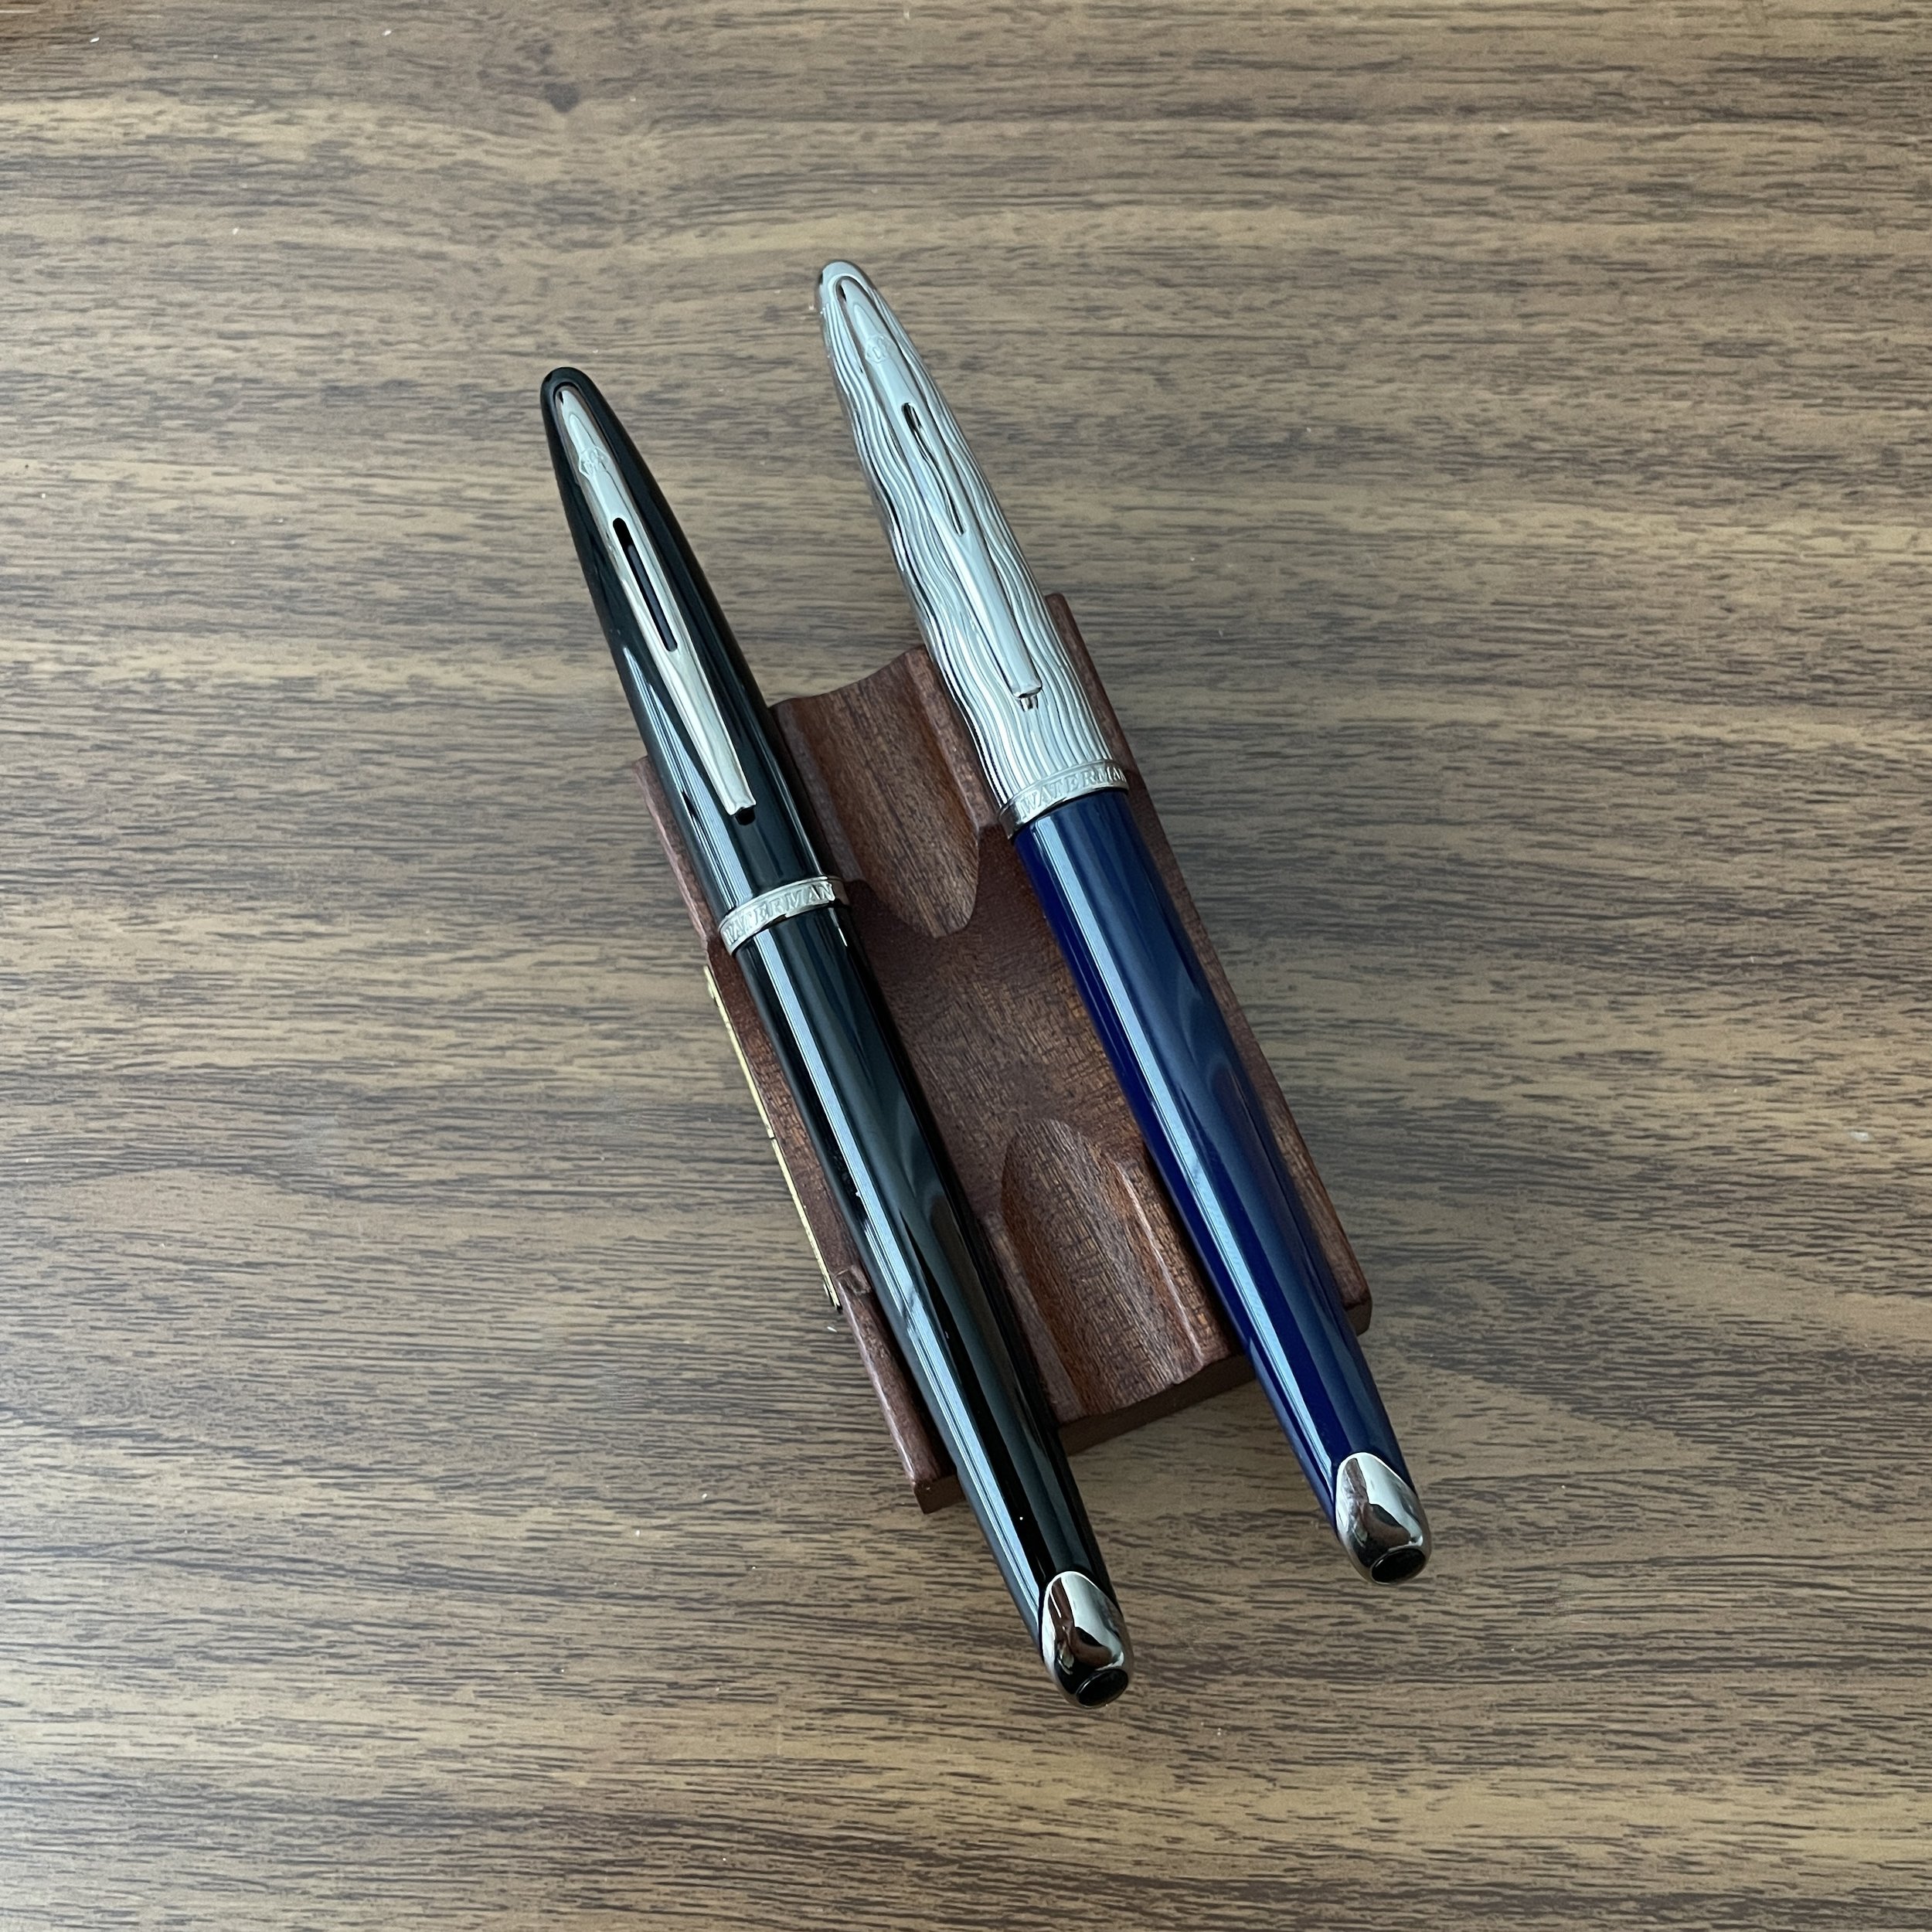 Fountain pens in middle of a renaissance